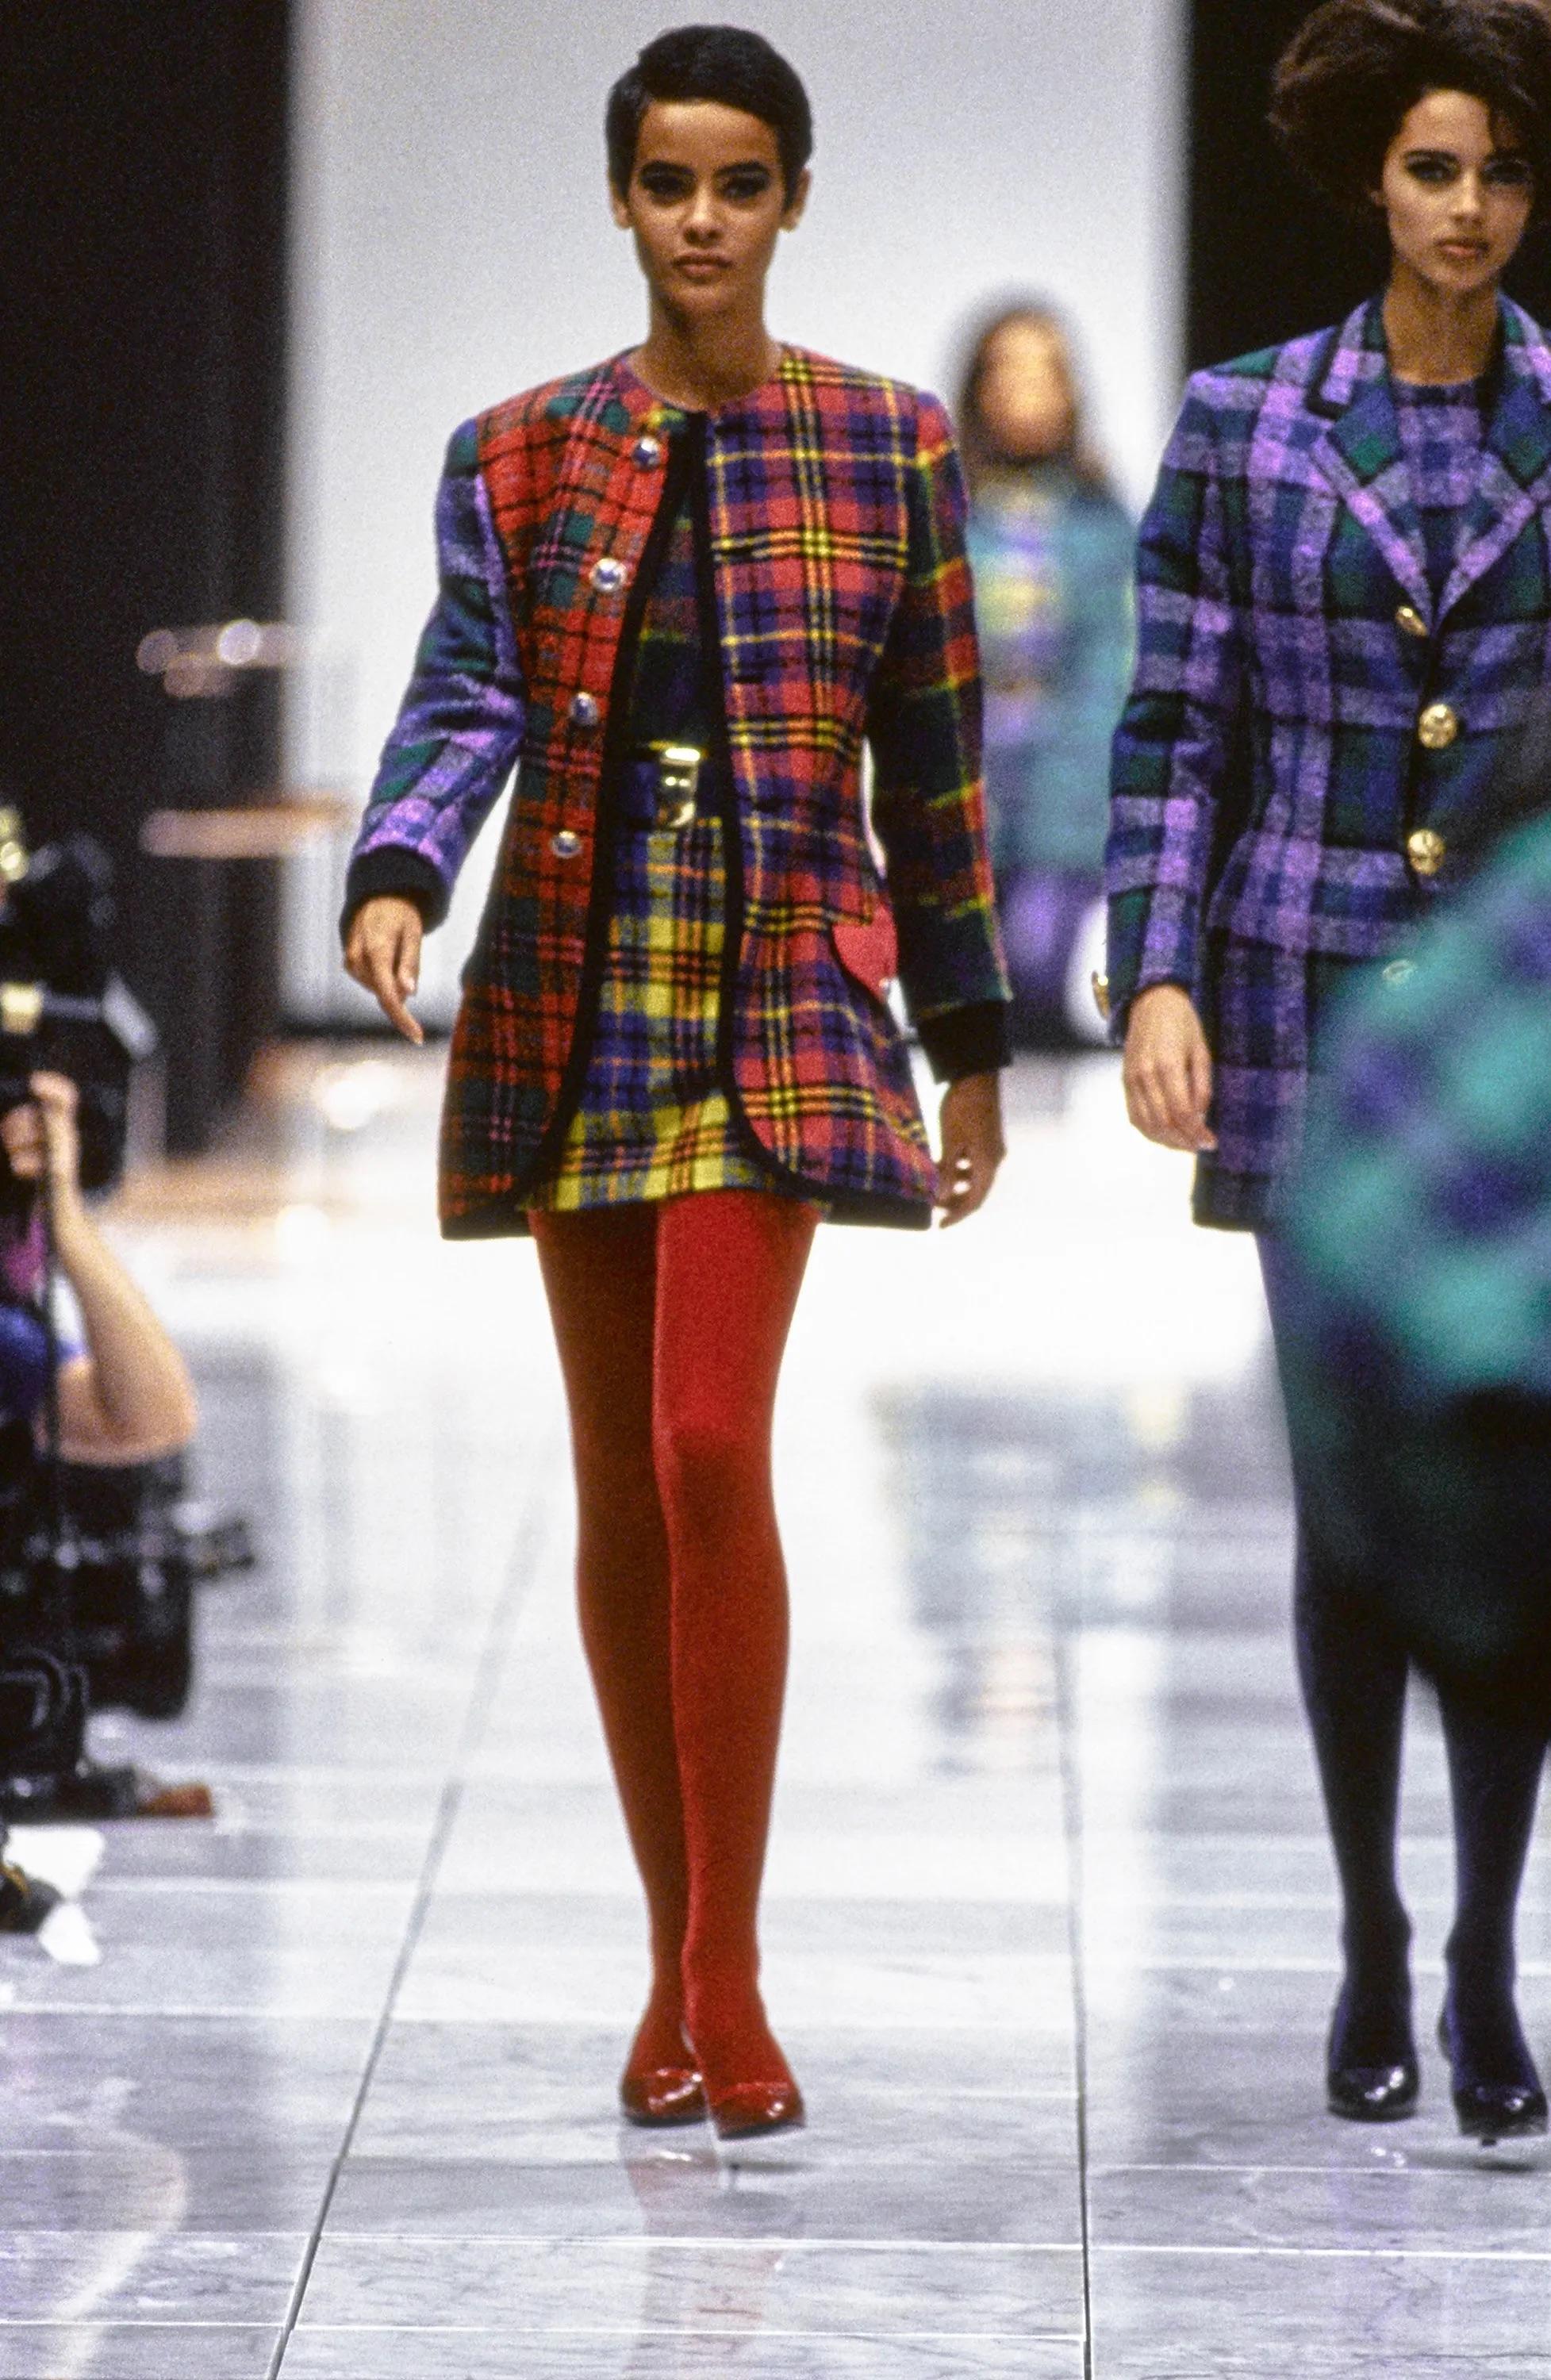 Presenting a beautiful purple and green plaid Gianni Versace tweed blazer dress, designed by Gianni Versace. From the Fall/Winter 1991 collection, this long jacket debuted on the season's runway and showcases the brand's dedication to impeccable